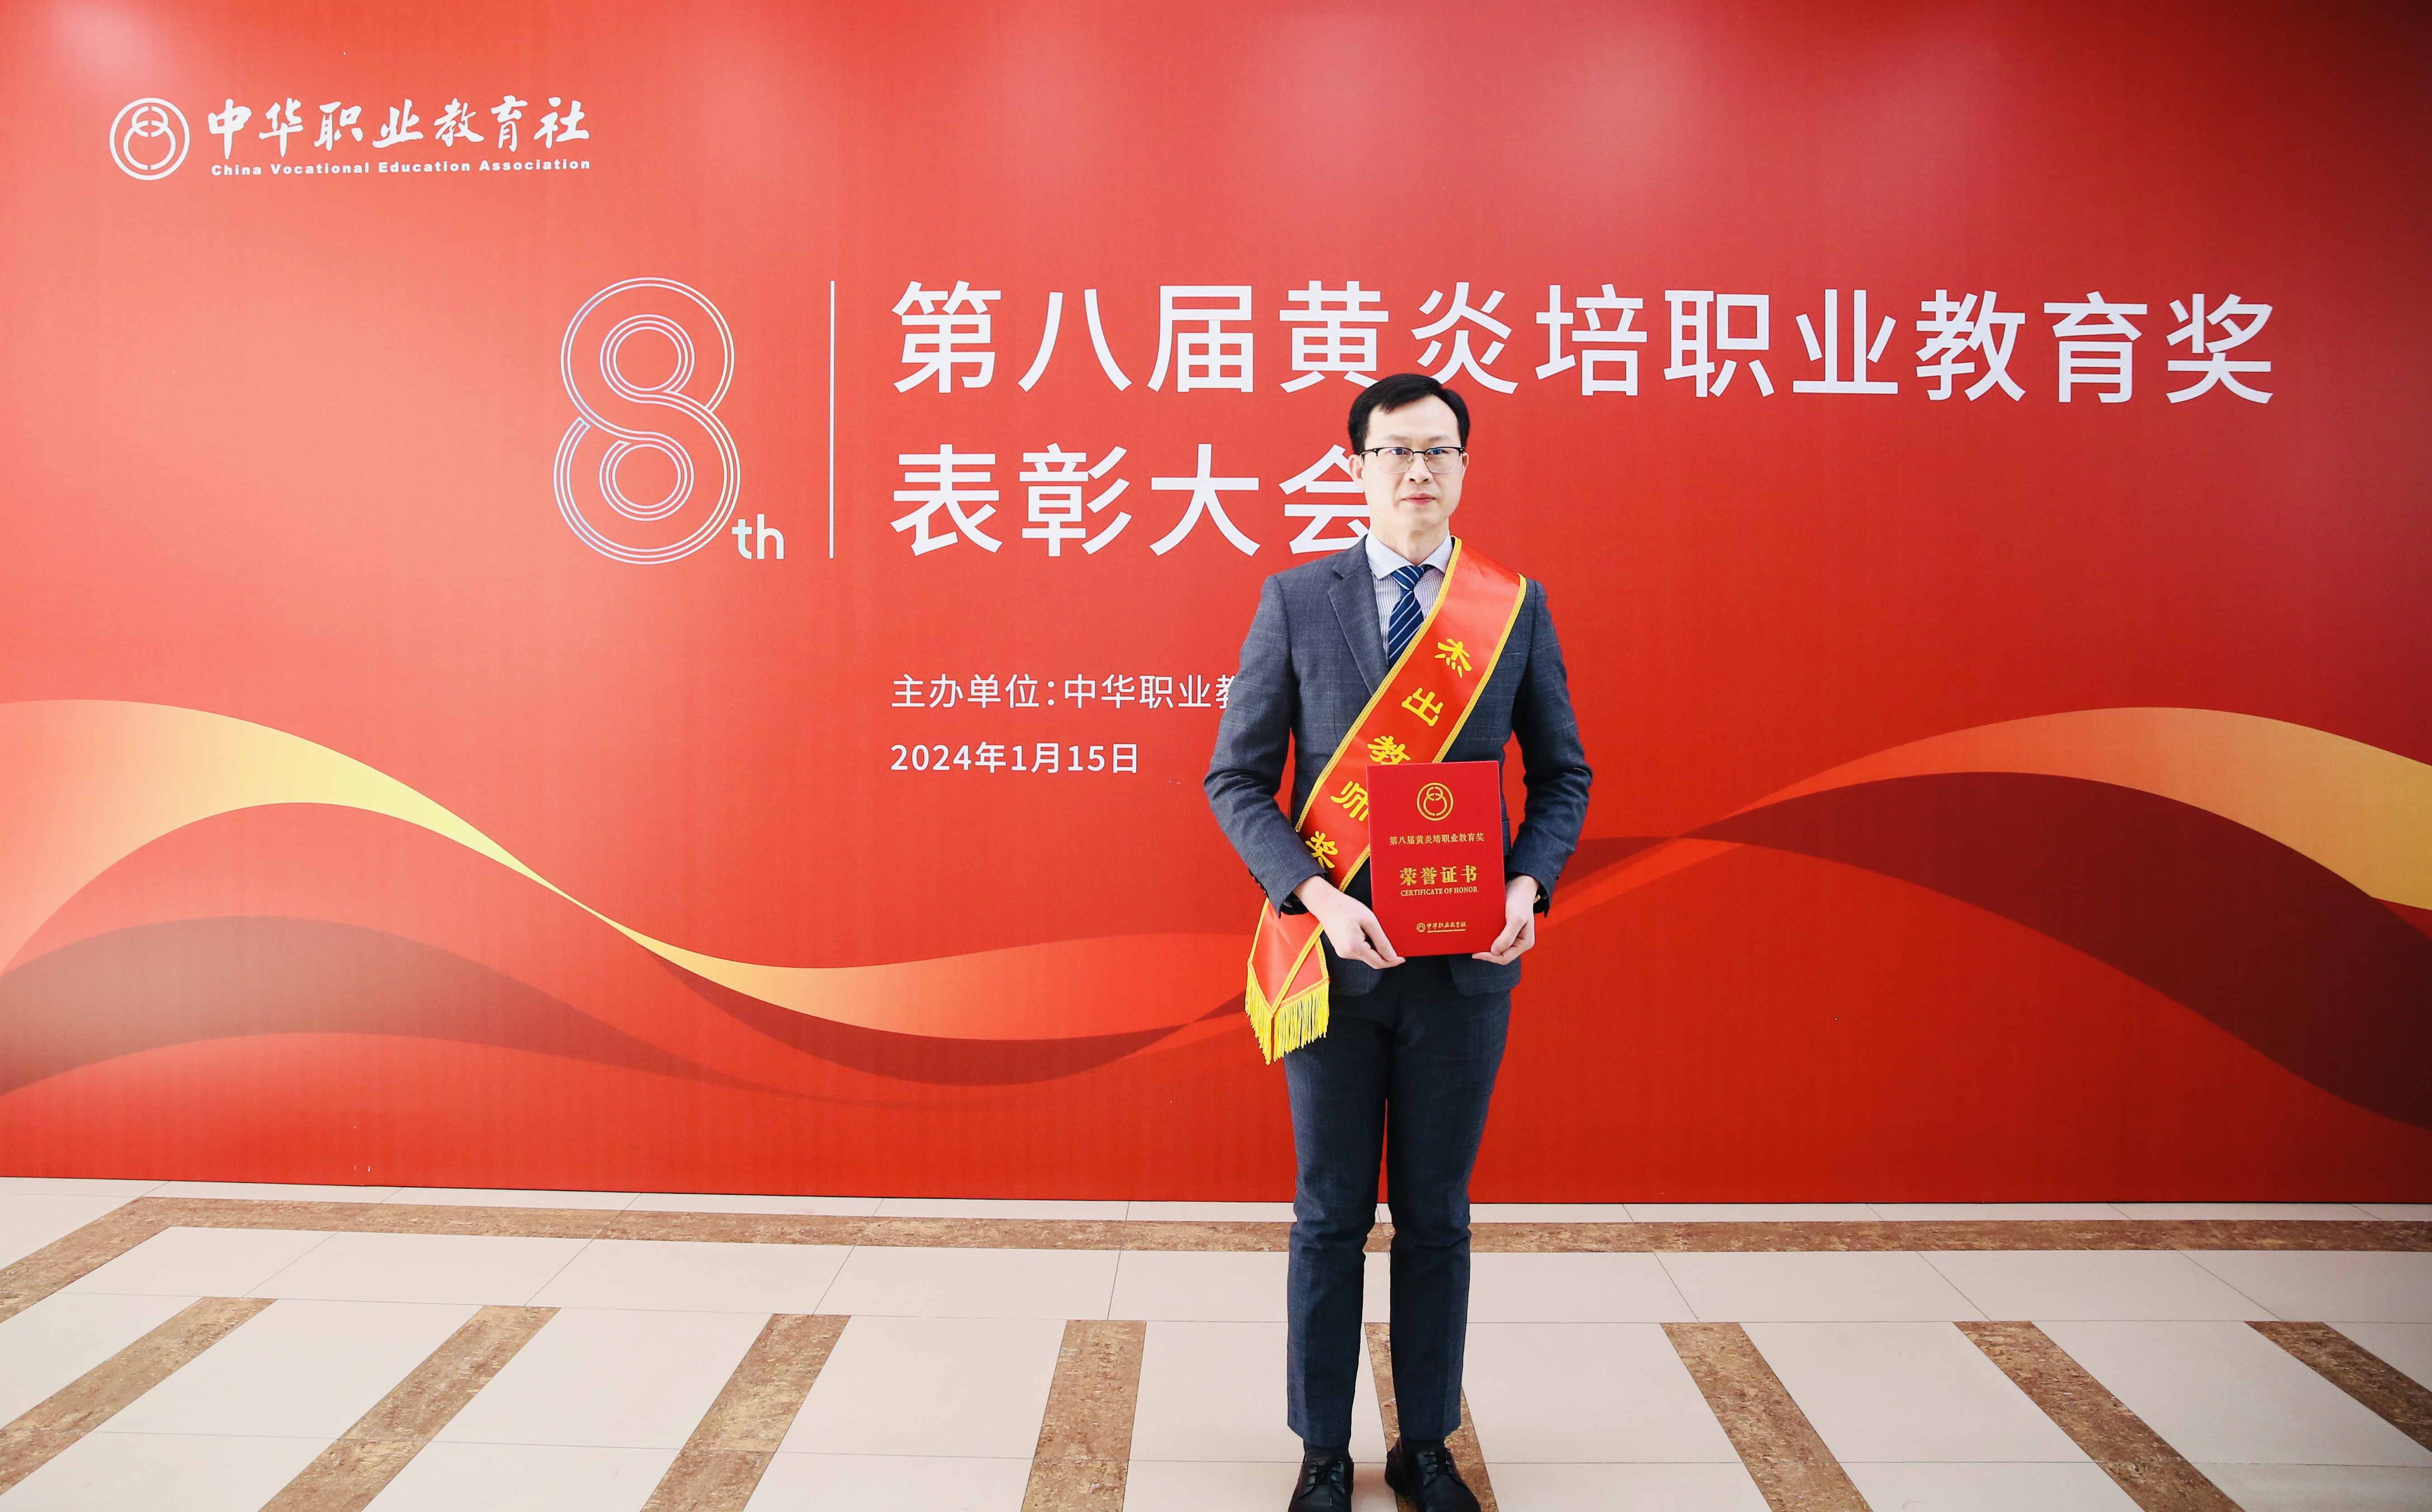 Good News| Prof. Tang Chen won the "Outstanding Teacher Award" of Huang Yanpei Vocational